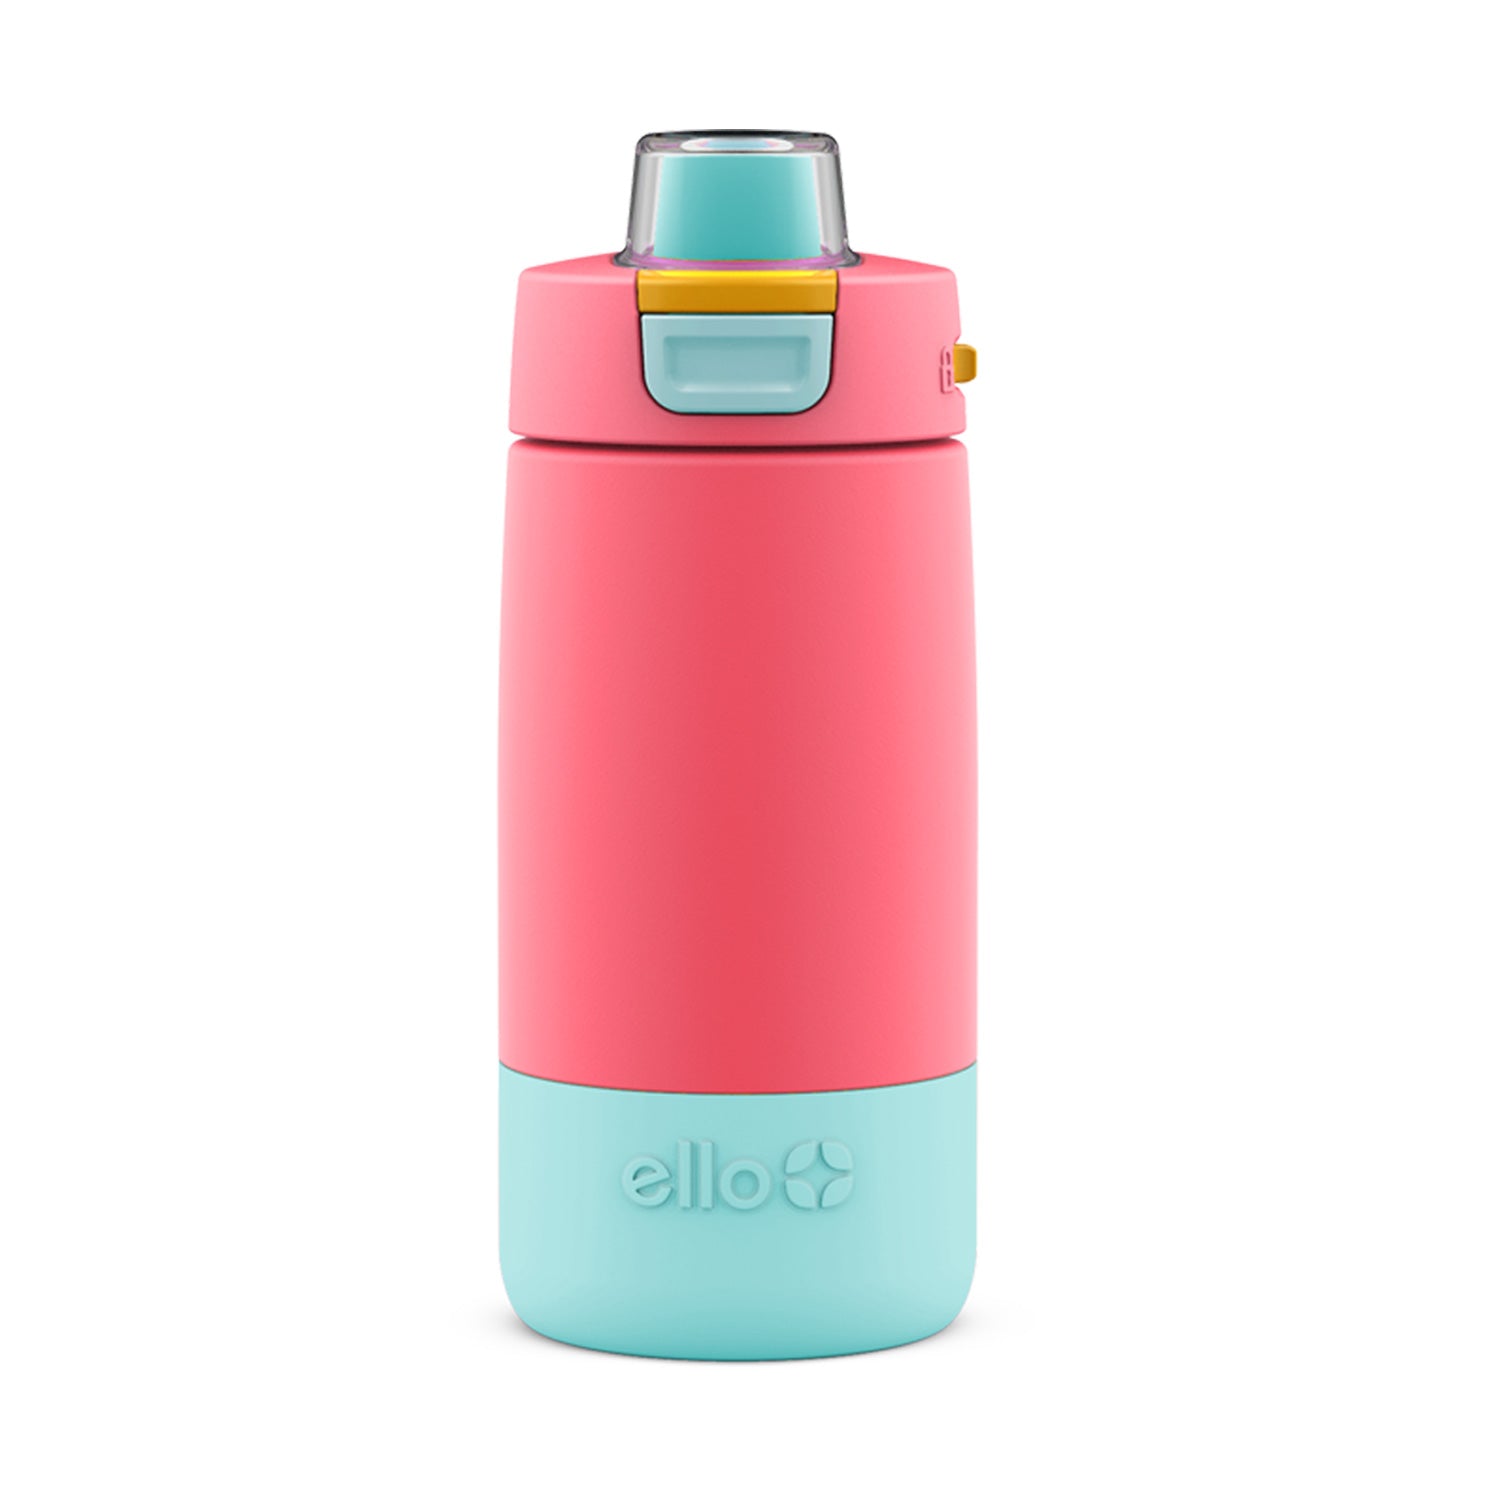 Ello Campy Vacuum Insulated Stainless Steel Water Bottle with Slider Lid, 16 Ounce Avalon Sea, Pink